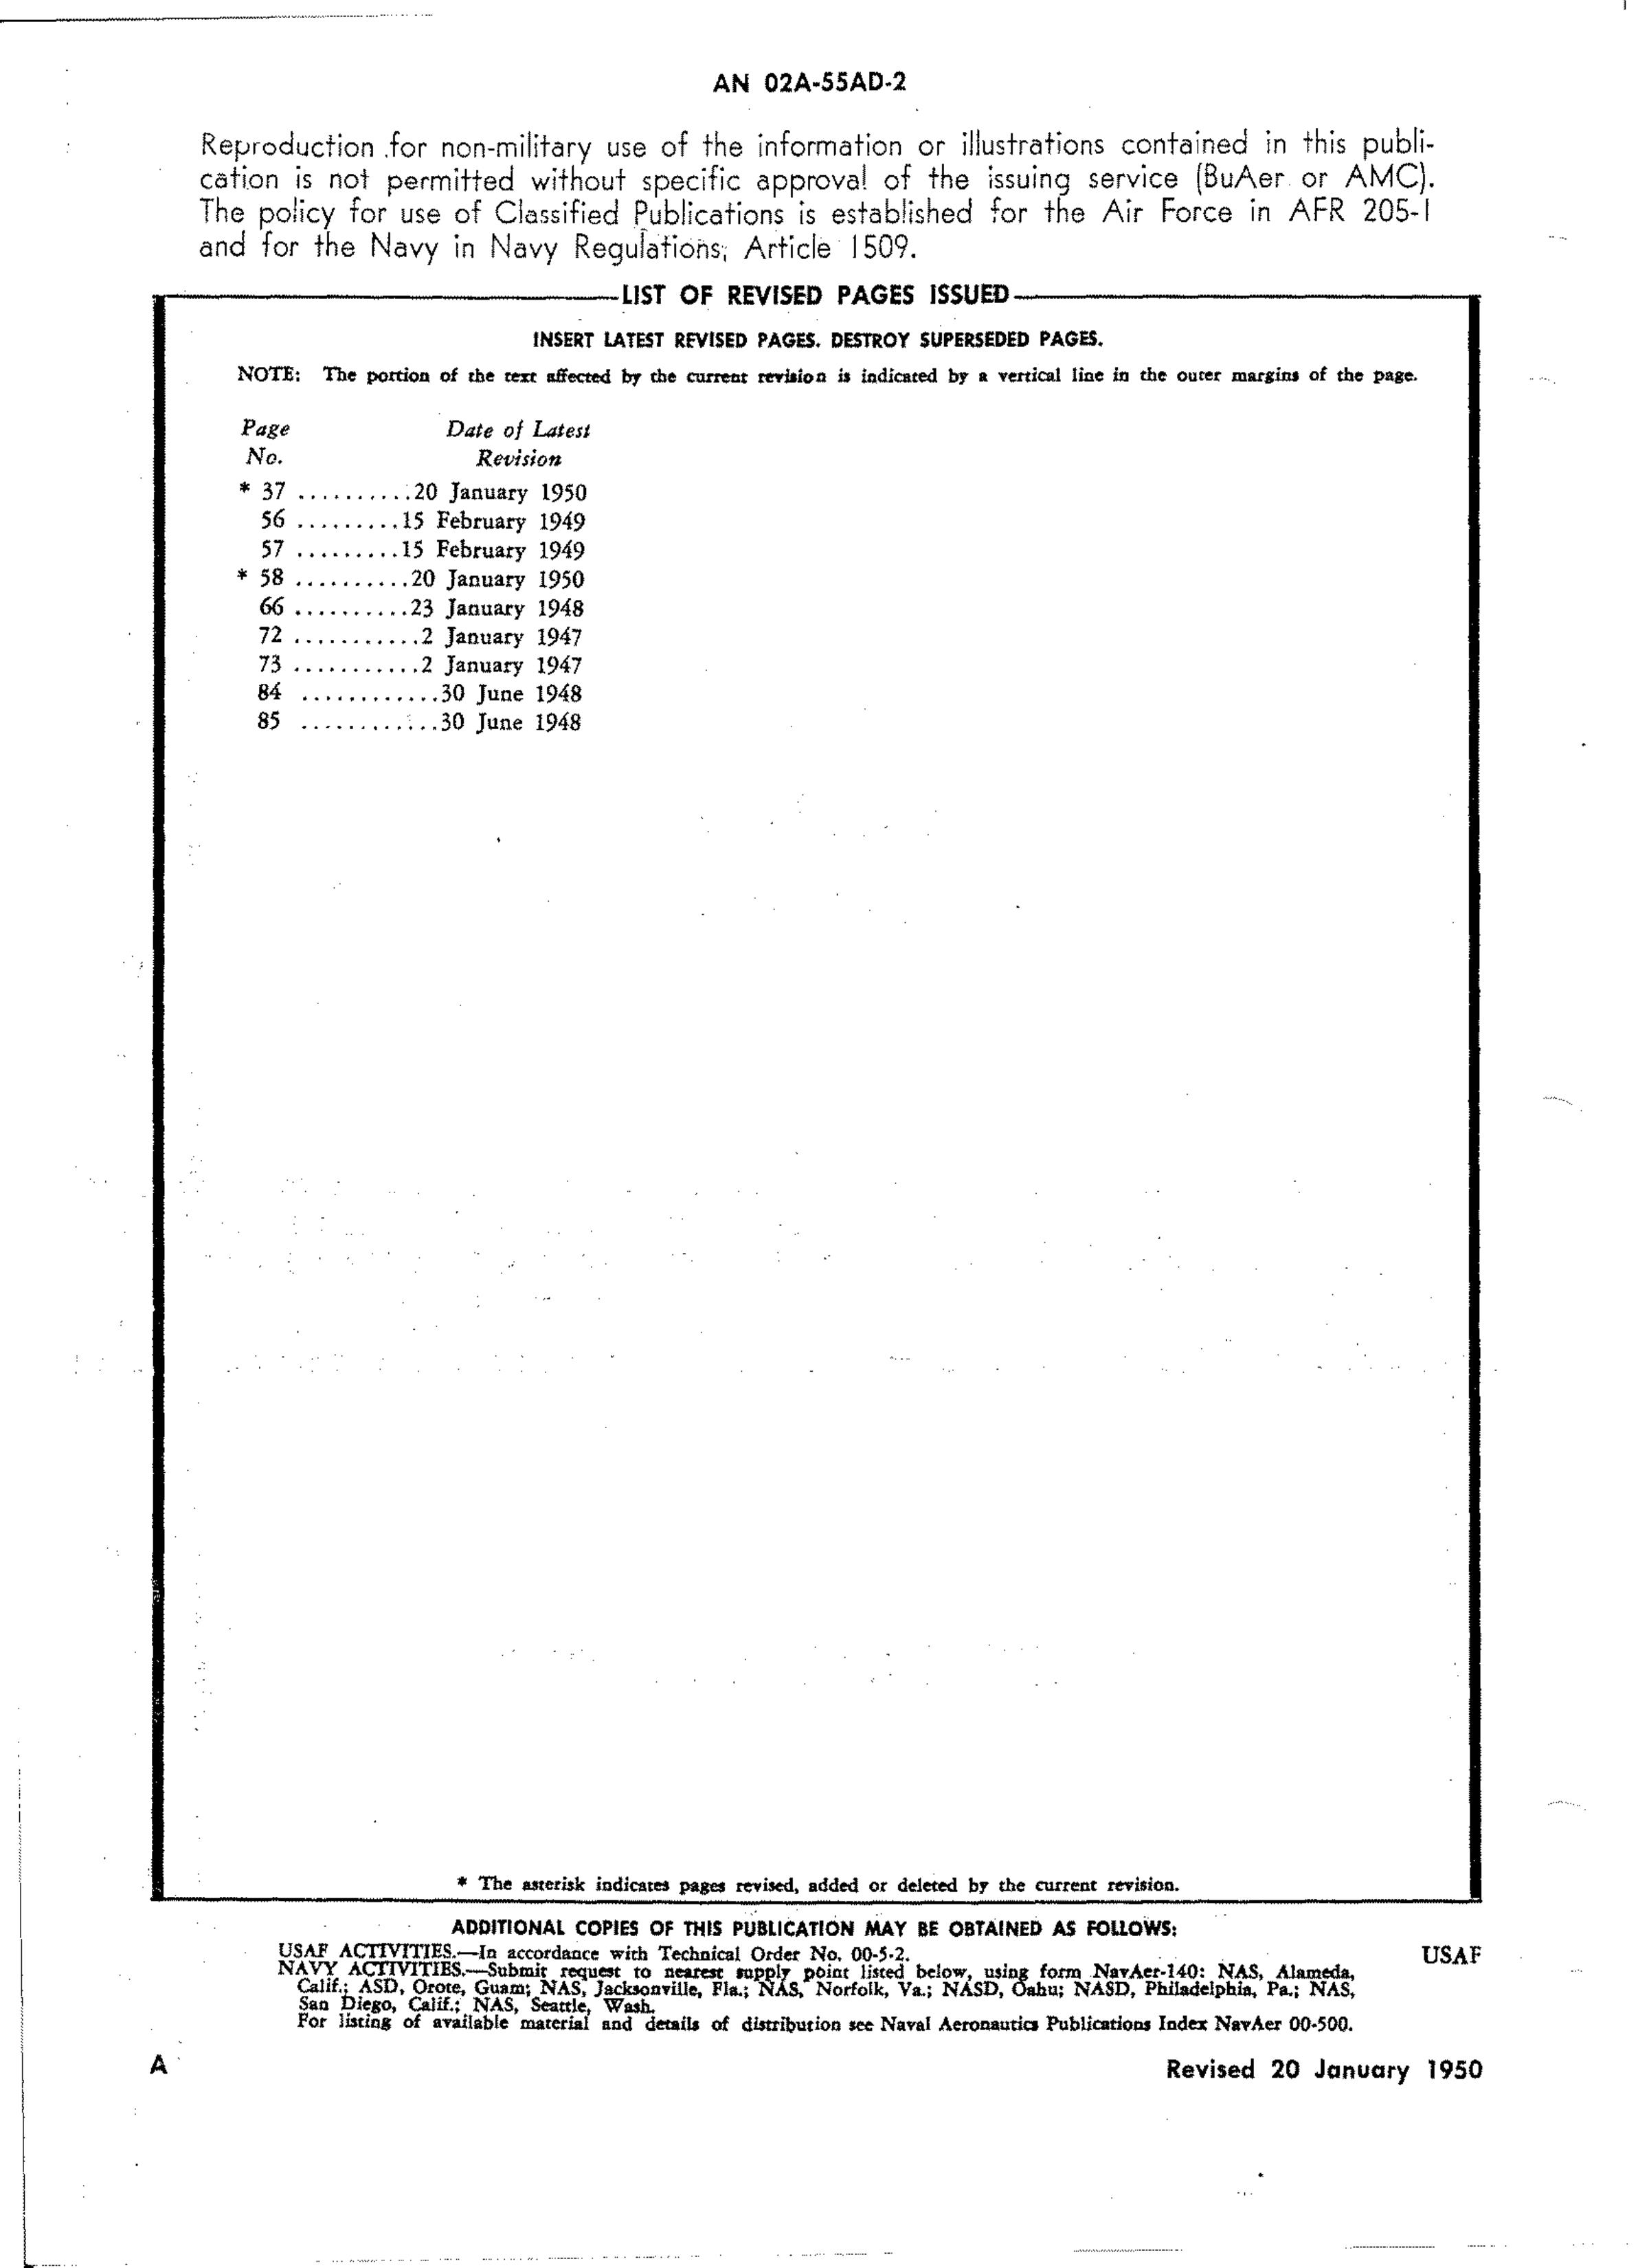 Sample page 2 from AirCorps Library document: Service Instructions for Model V-1650-9 Aircraft Engines